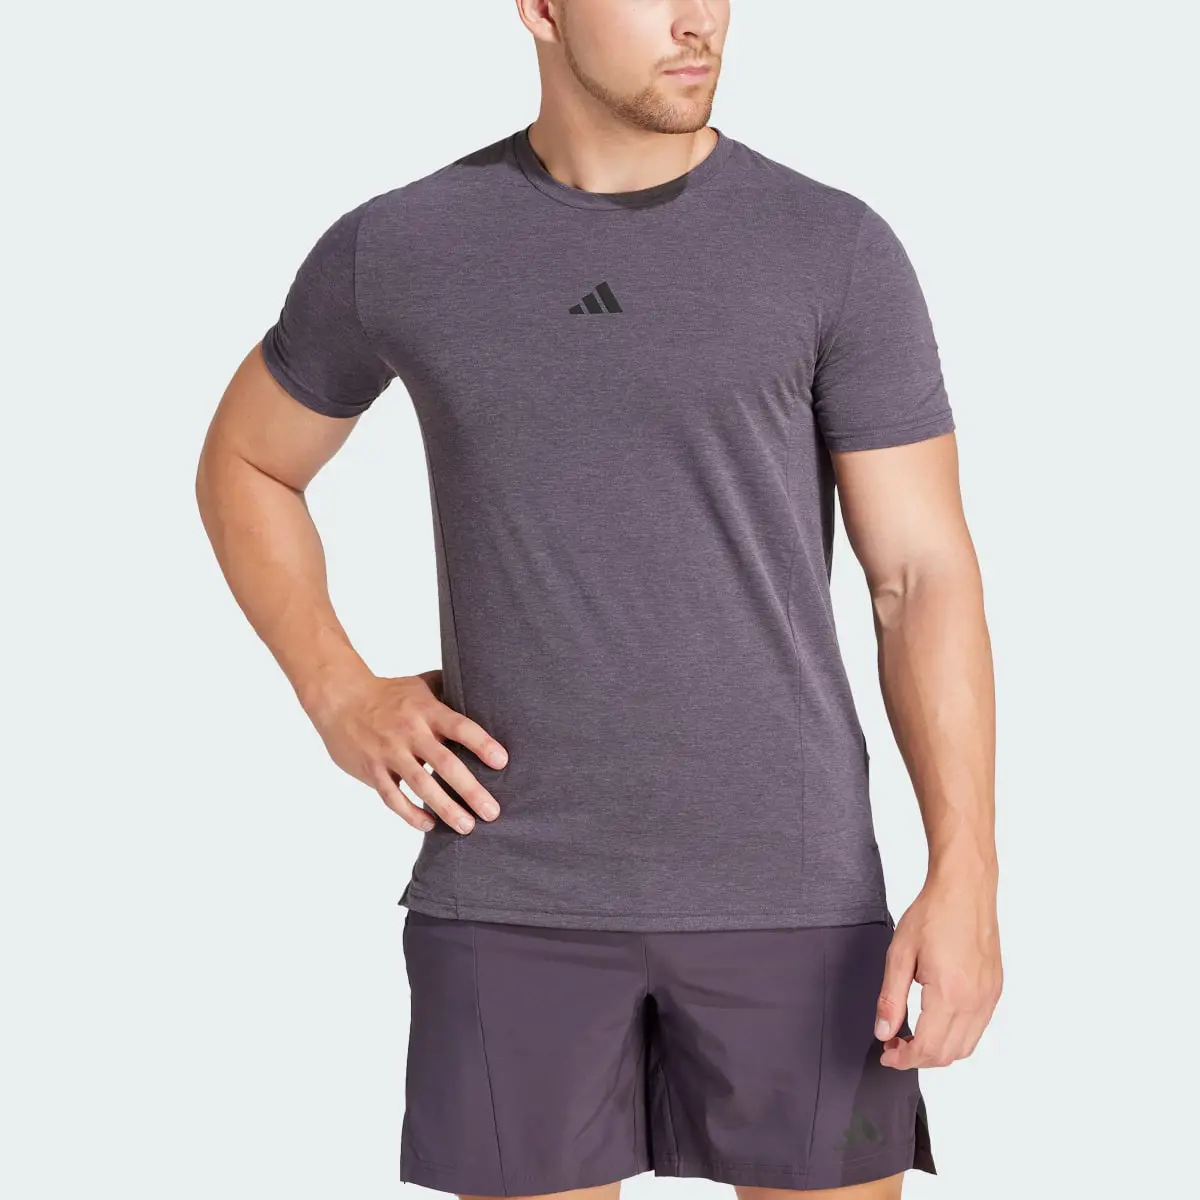 Adidas Designed for Training Workout Tee. 1